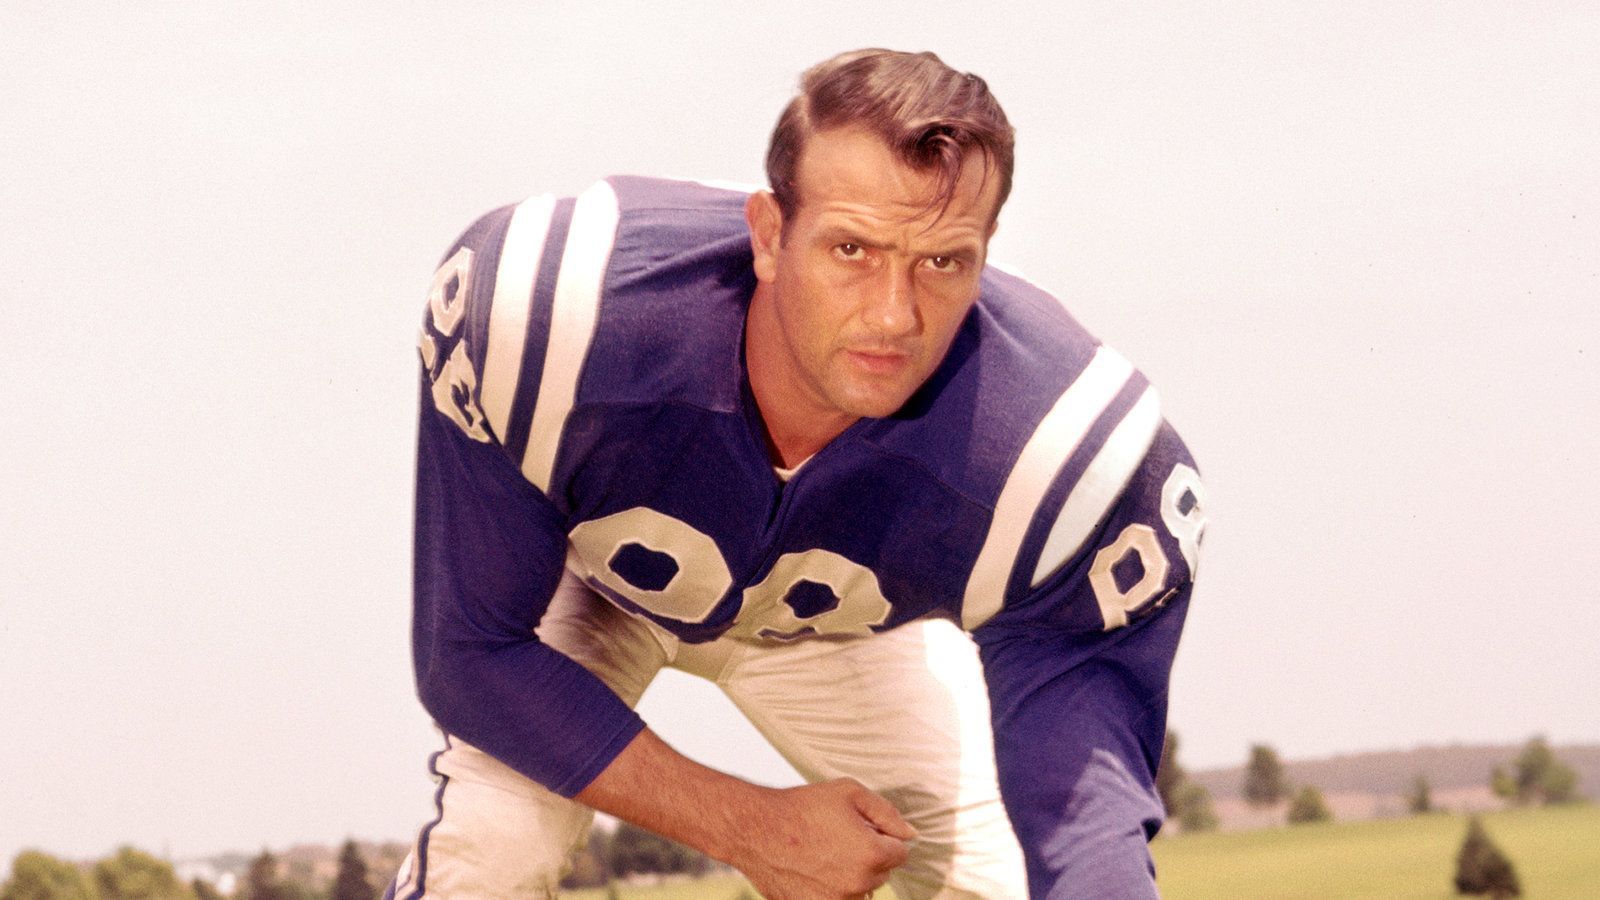 <strong>89: Gino Marchetti<br></strong>Teams: Dallas Texans, Baltimore Colts<br>Position: Defensive End<br>Erfolge: Pro Football Hall of Famer, zweimaliger NFL-Champion, siebenmaliger First Team All-Pro, elfmaliger Pro Bowler<br>Honorable Mention: Mike Ditka